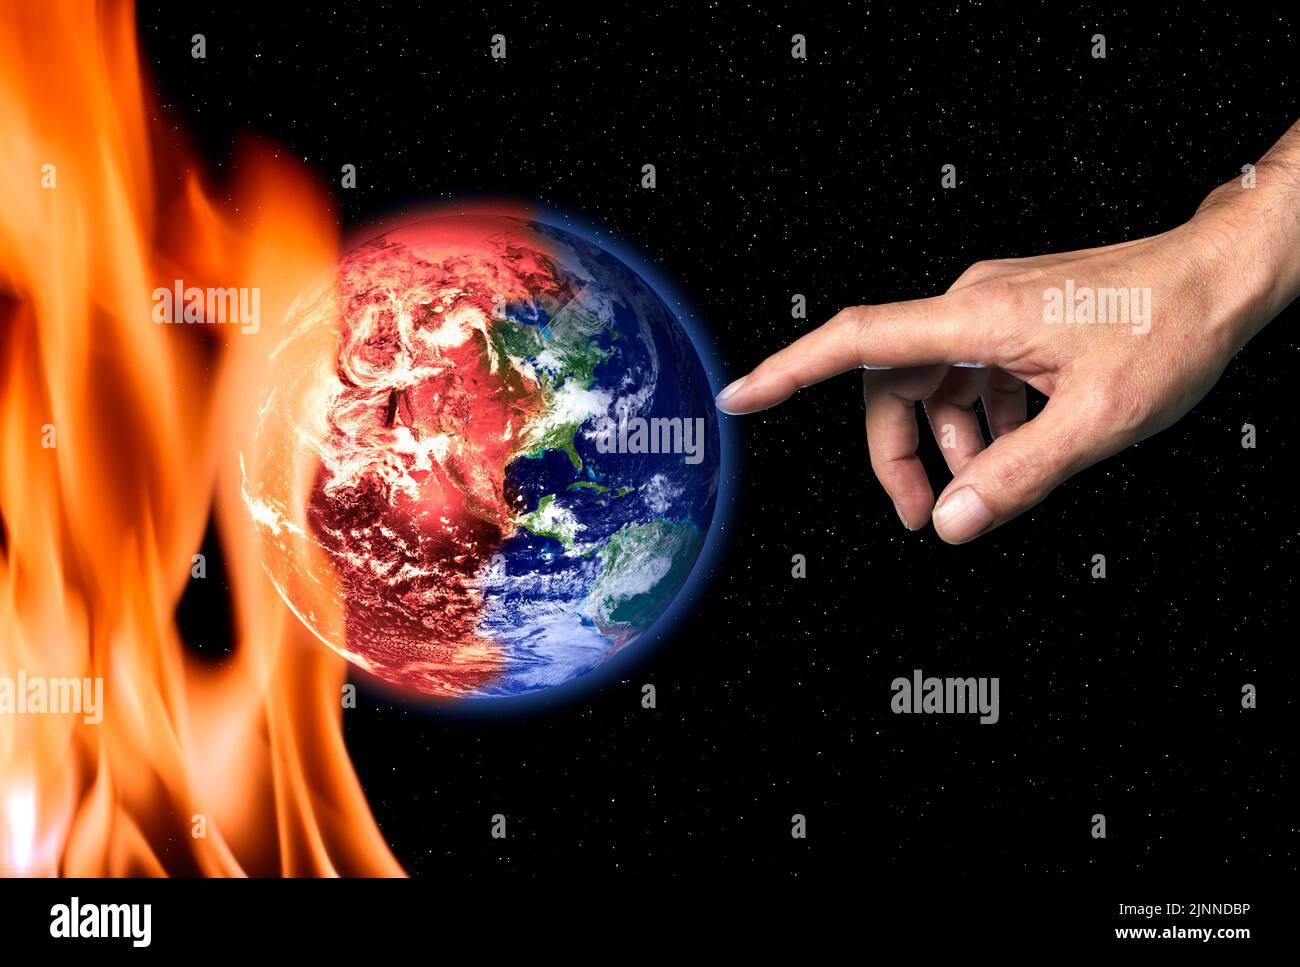 Earth being pushed into a hotter state, composite image Stock Photo